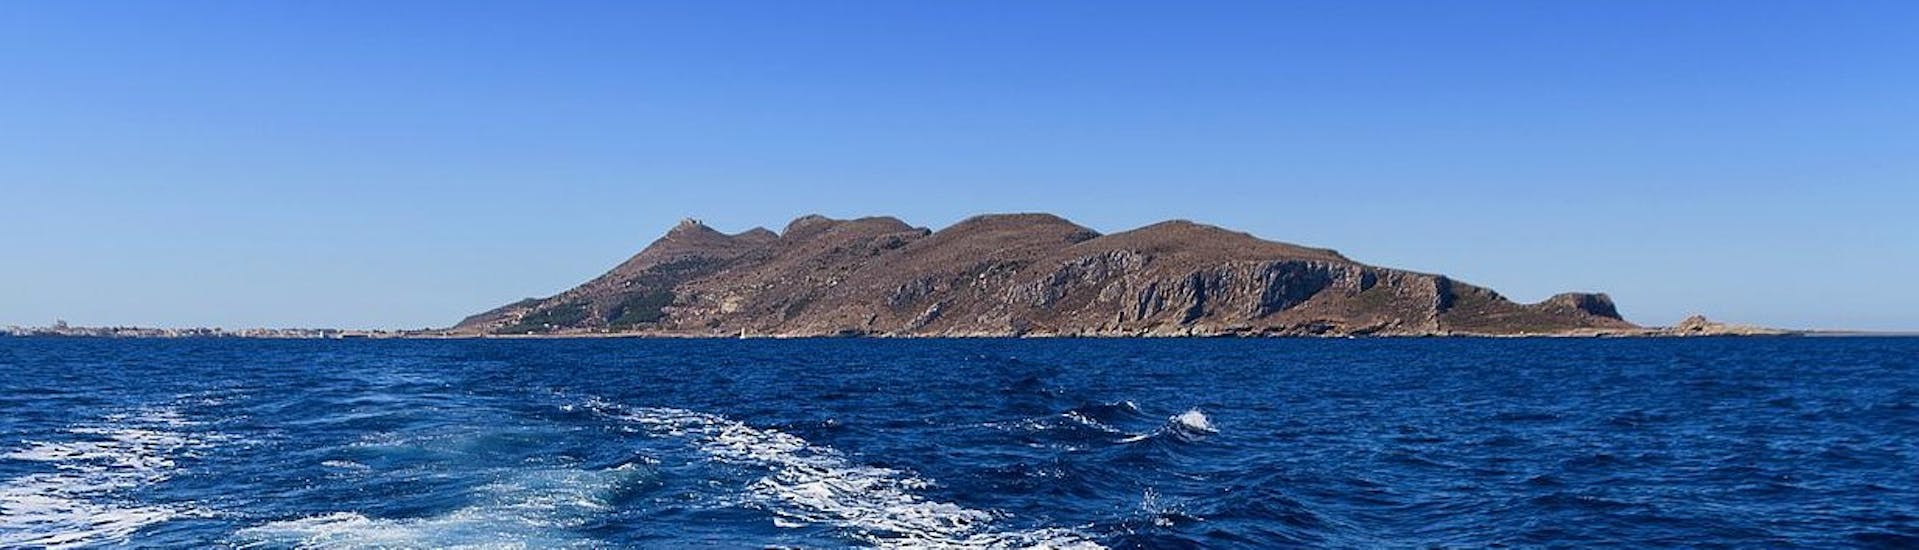 Breathtaking view of the Egadi archipelago to be seen during a boat trip from Castellammare del Golfo to Favignana and Levanzo with Egadi Navigazione.